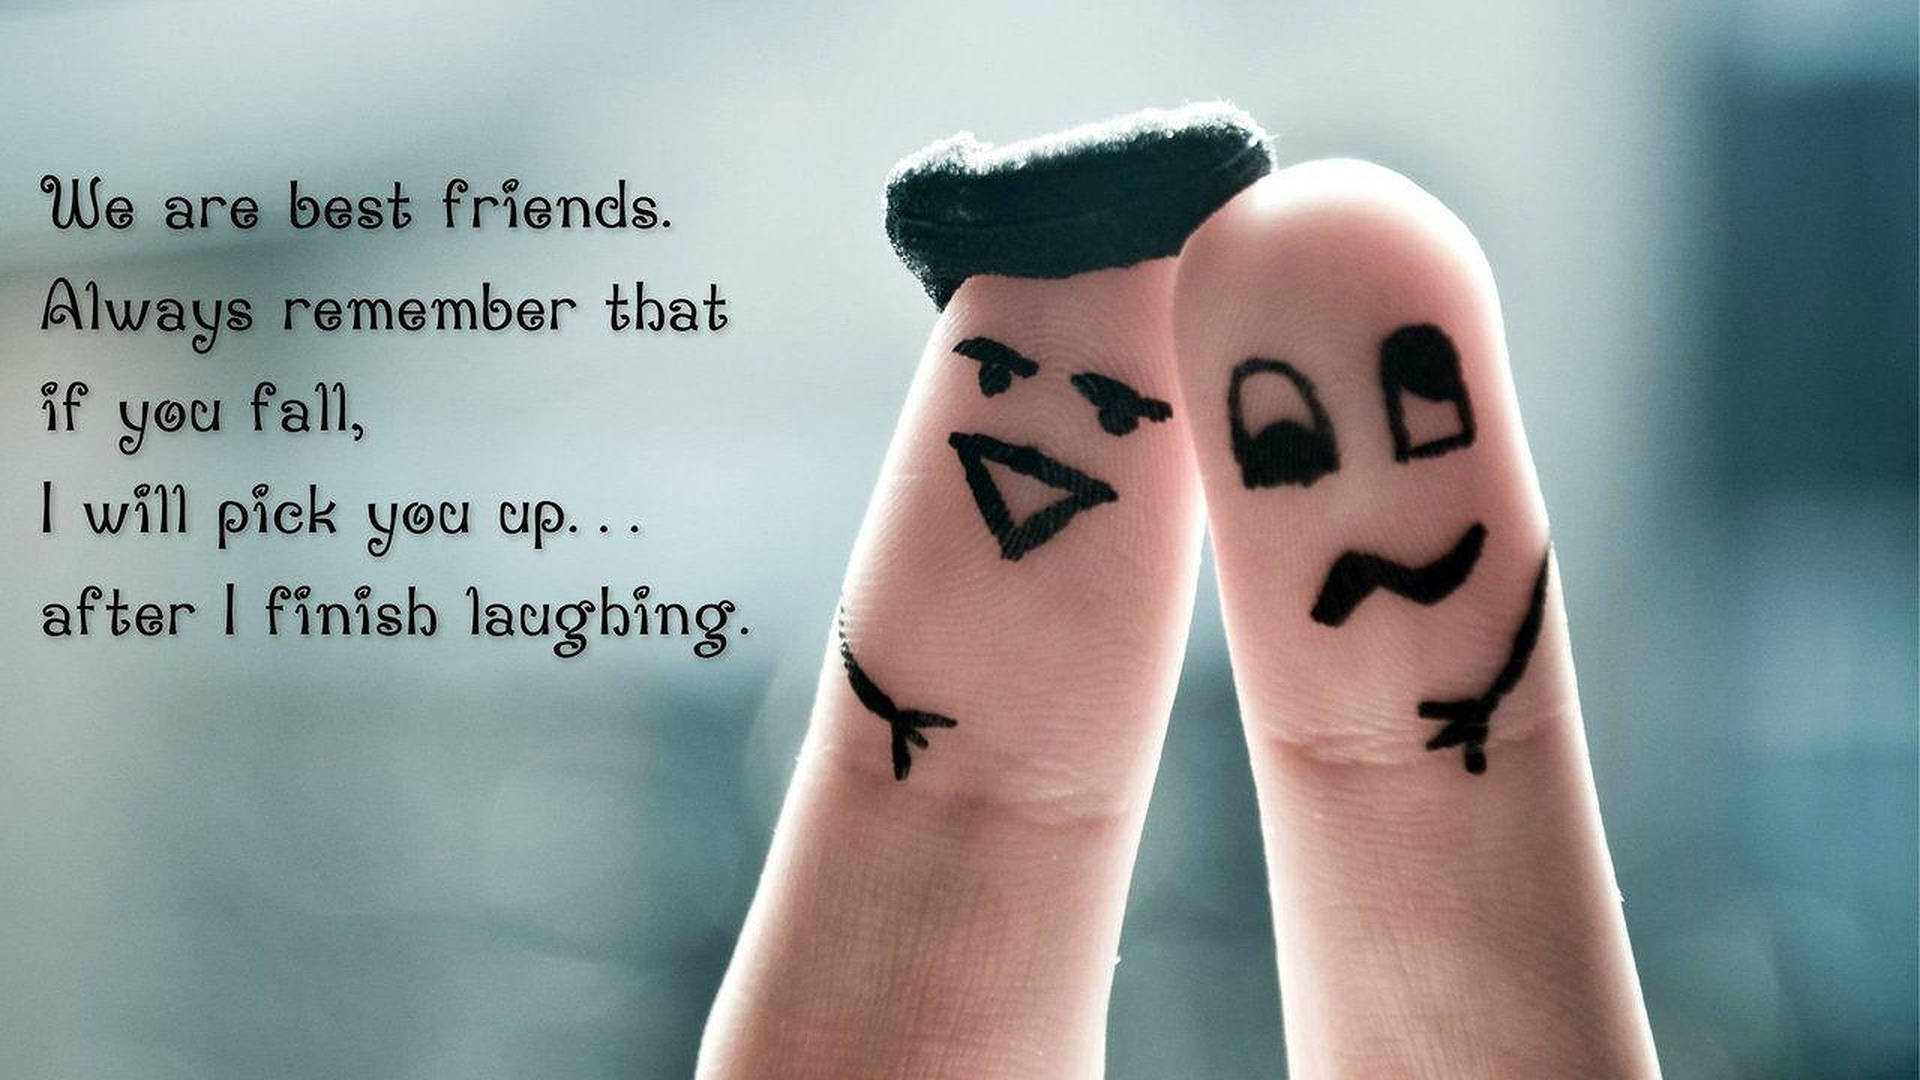 Friendship Quotes With Fingers